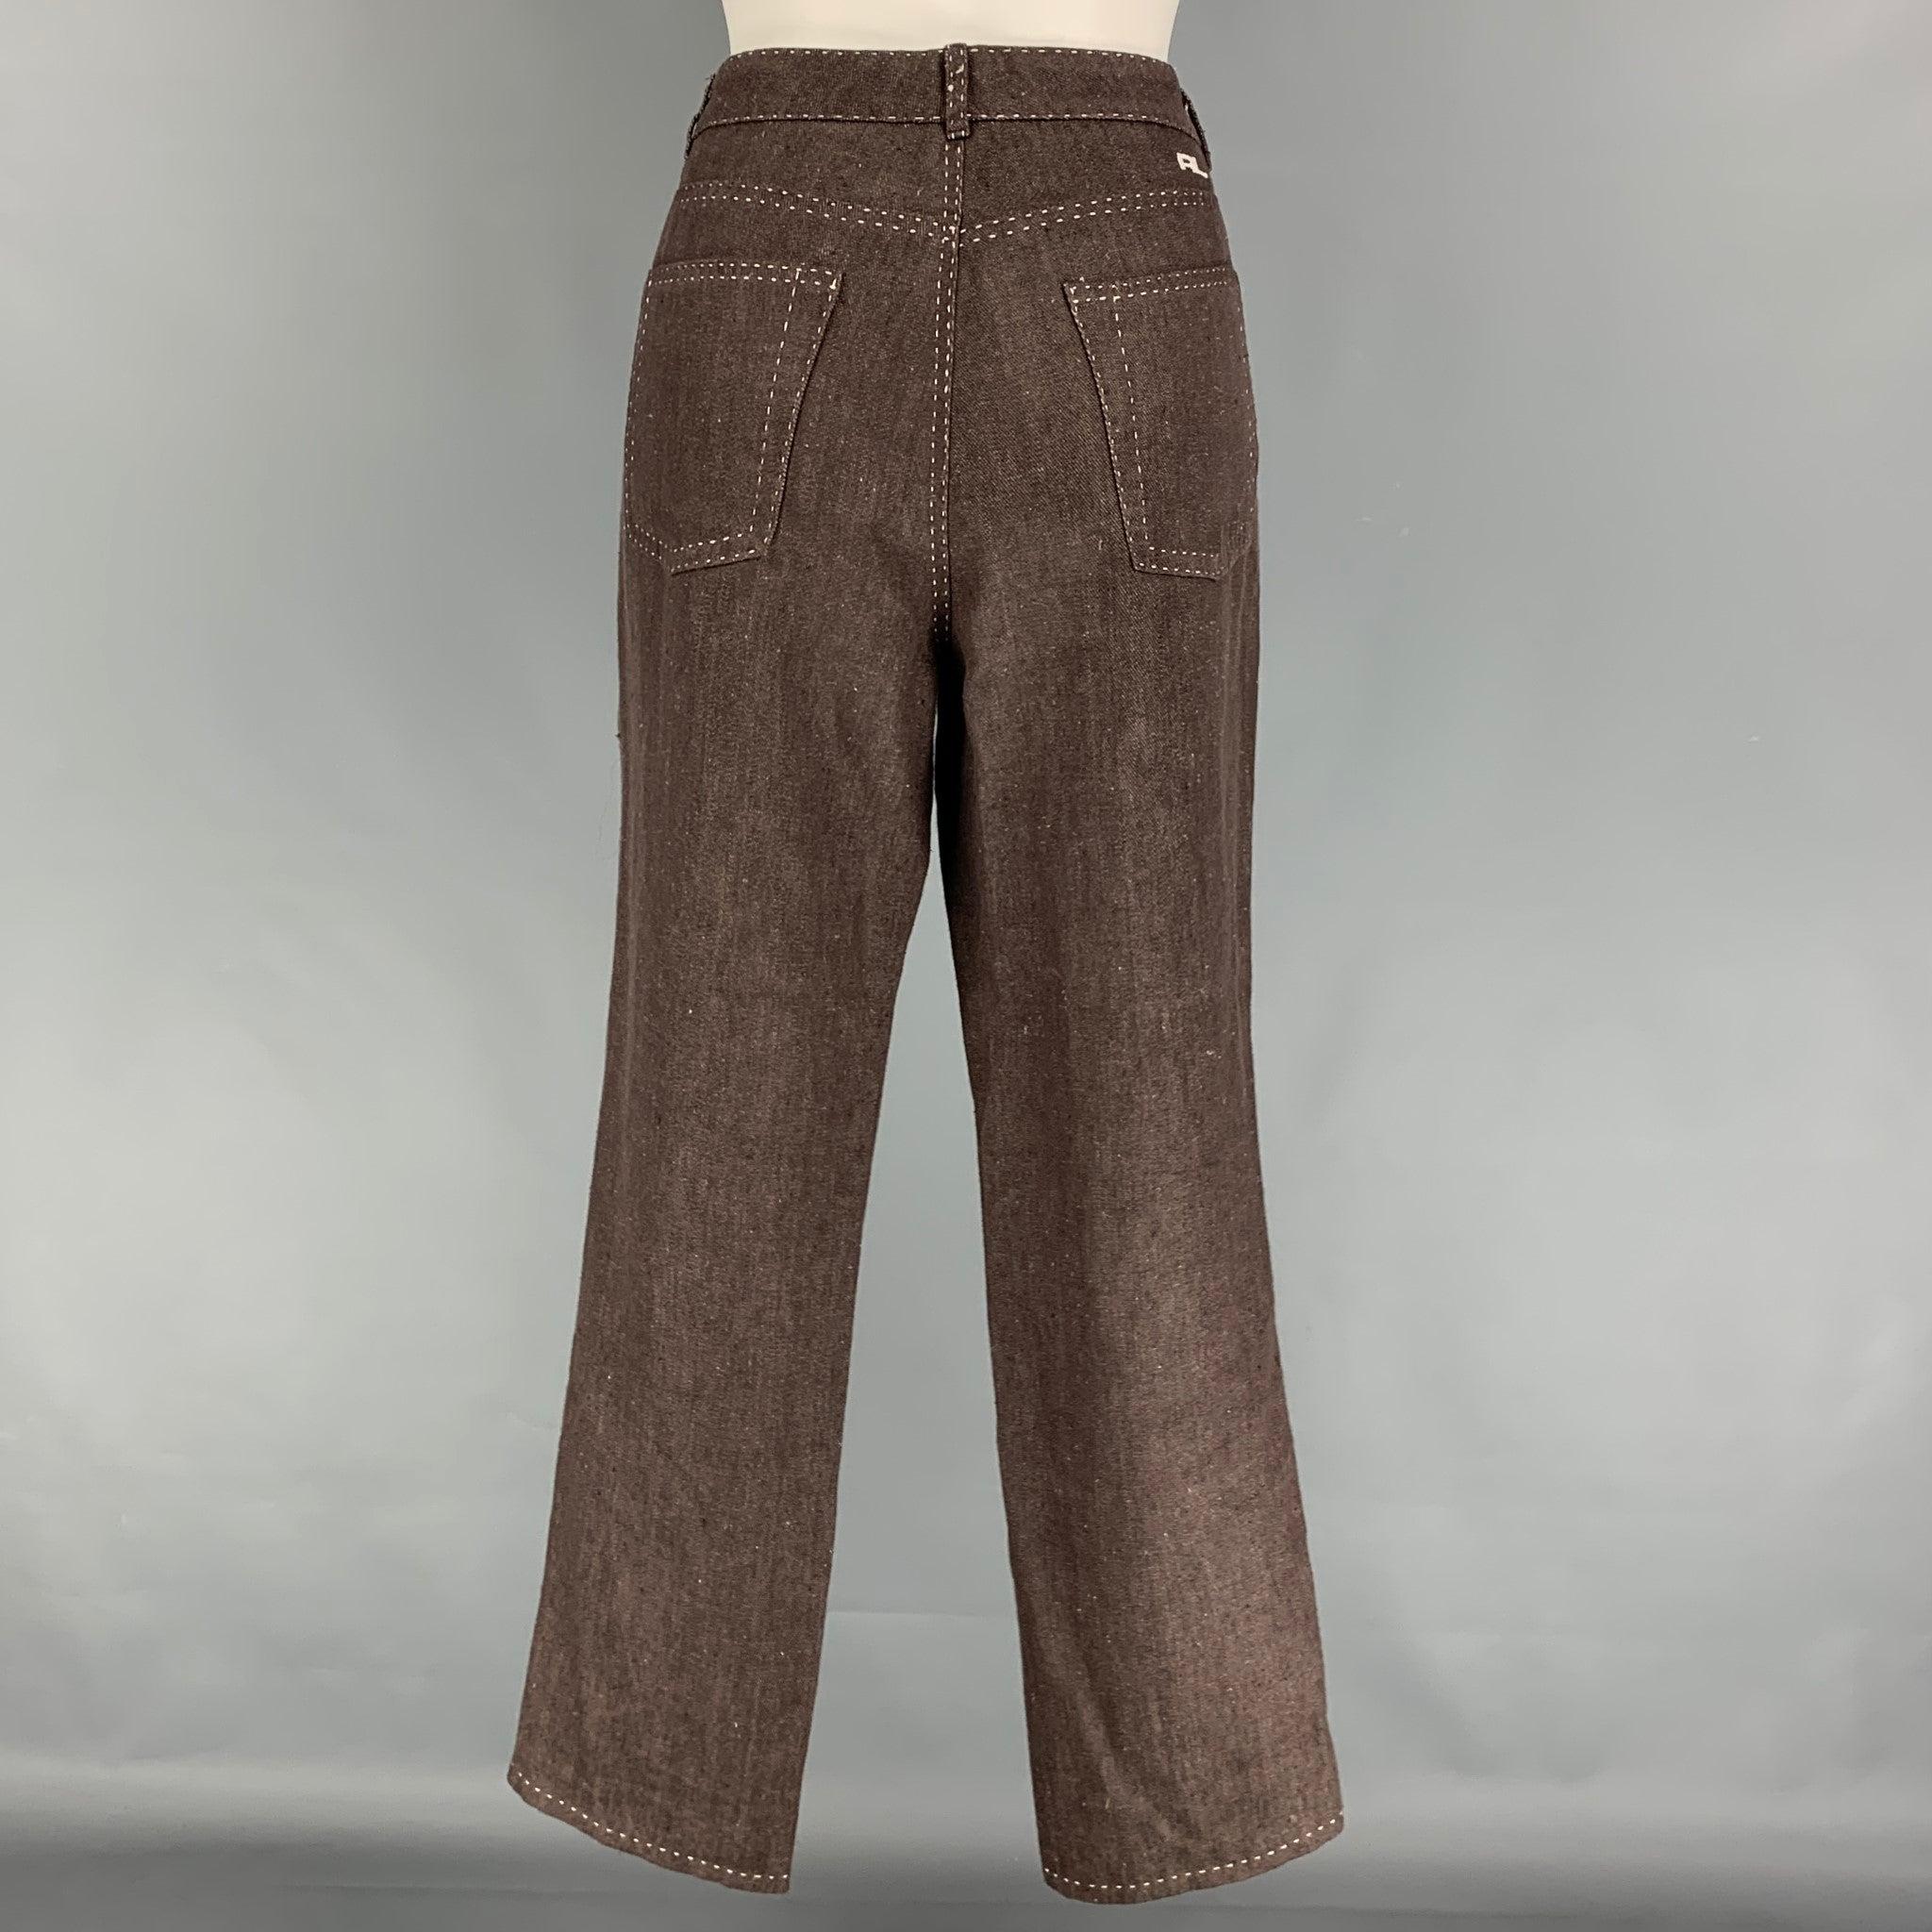 RALPH LAUREN Collection casual pants comes in a brown linen featuring a relaxed fit, contrast stitching, and a zip fly closure. Made in USA.
Good
Pre-Owned Condition. Light wear at front.  

Marked:   10 

Measurements: 
  Waist: 32 inches  Rise: 10